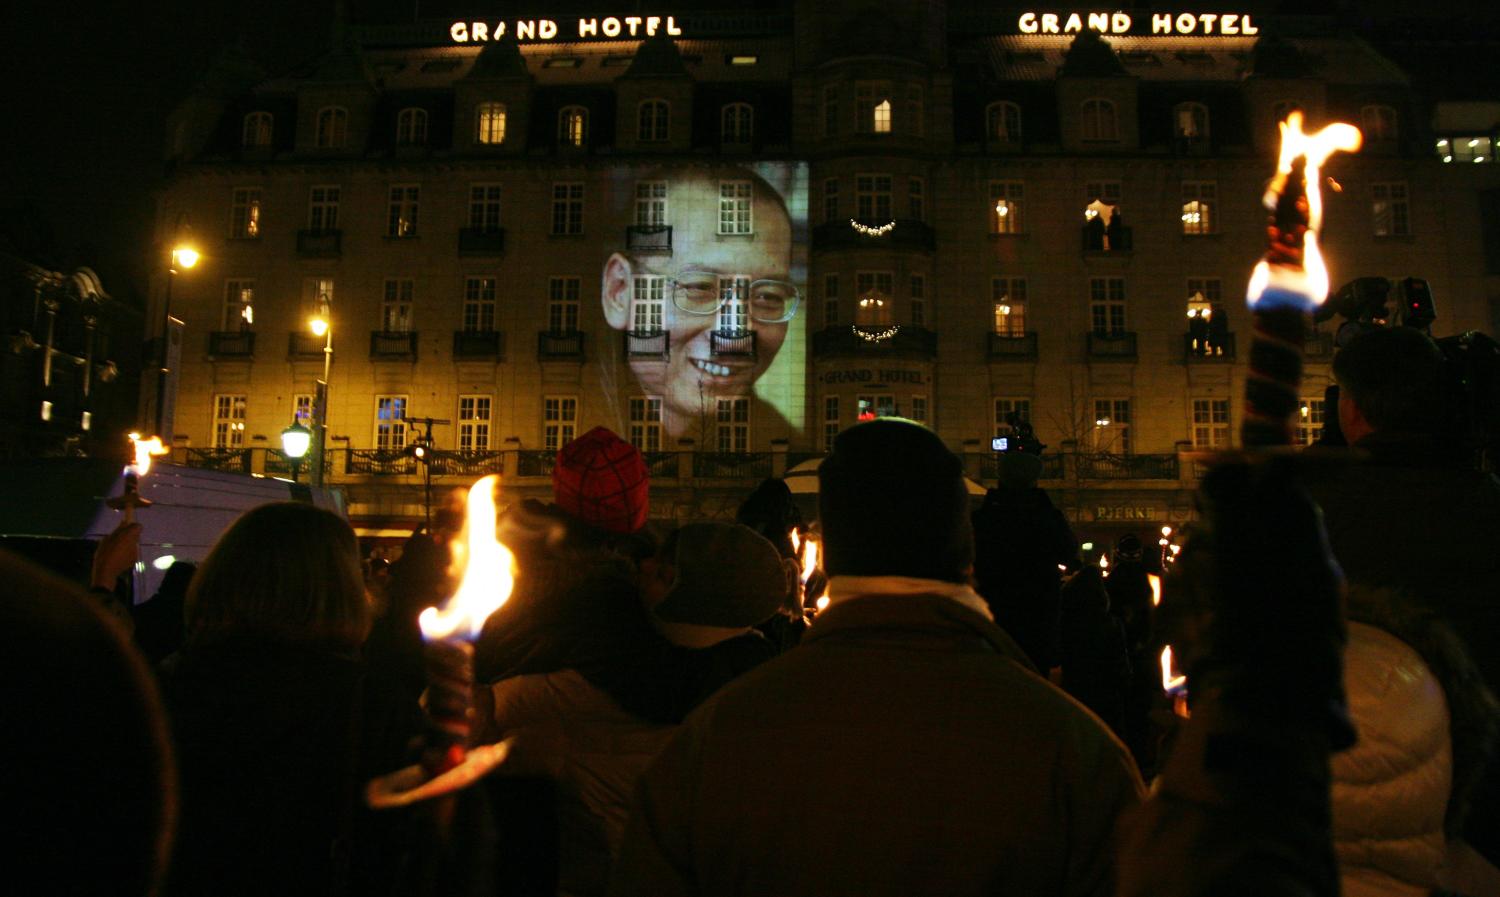 Liu Xiaobo's image projected onto an Oslo hotel after he was awarded the Nobel Peace Prize (Photo: Flickr/Aktiv|Oslo.no)